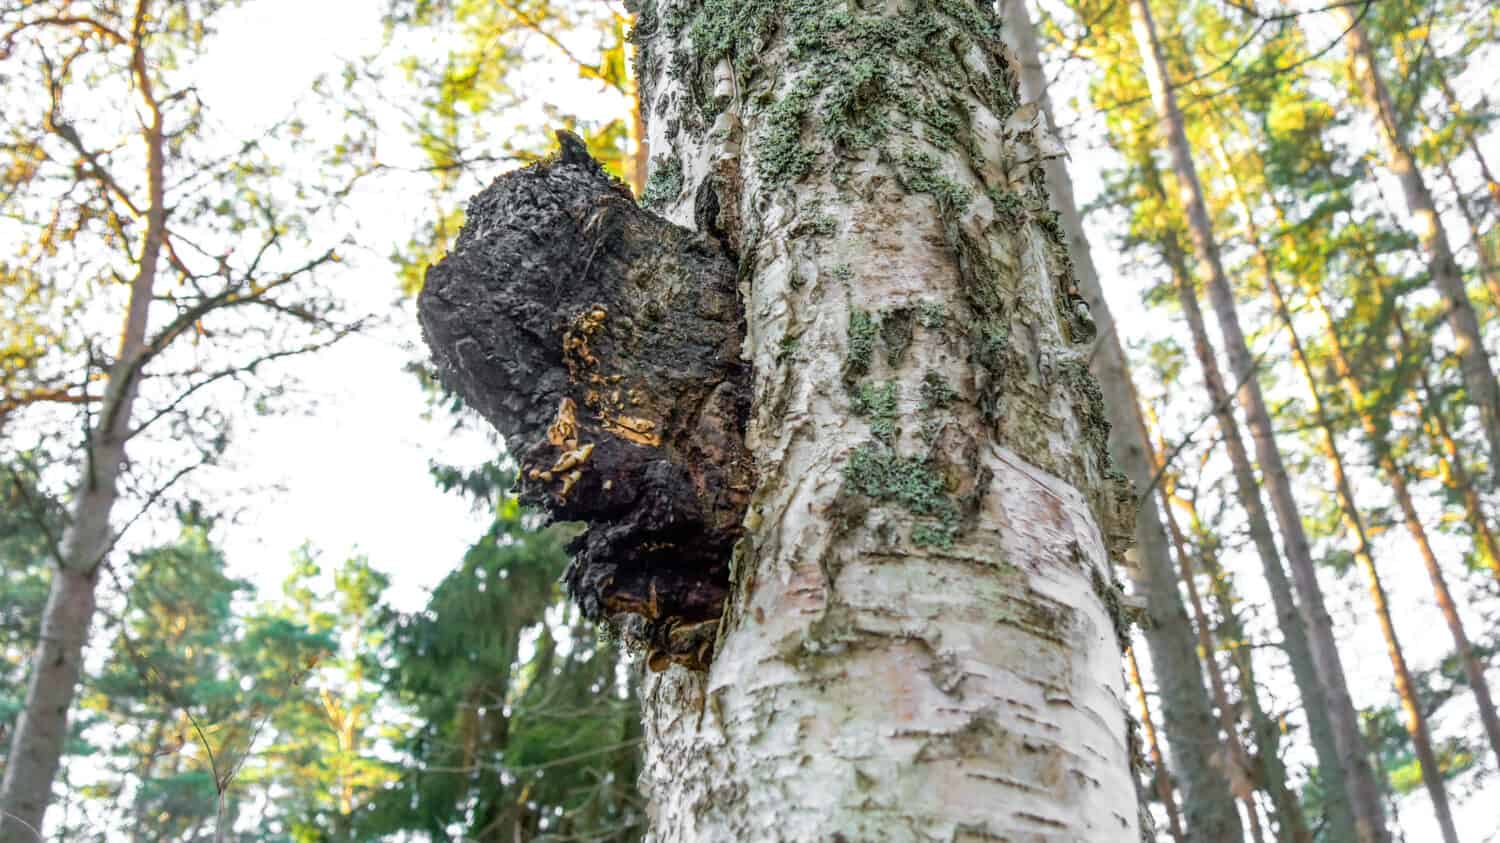 A black chaga mushroom on a birch tree. Inonotus obliquus commonly known as chaga mushroom is a fungus in Hymenochaetaceae family. It is parasitic on birch and other trees.